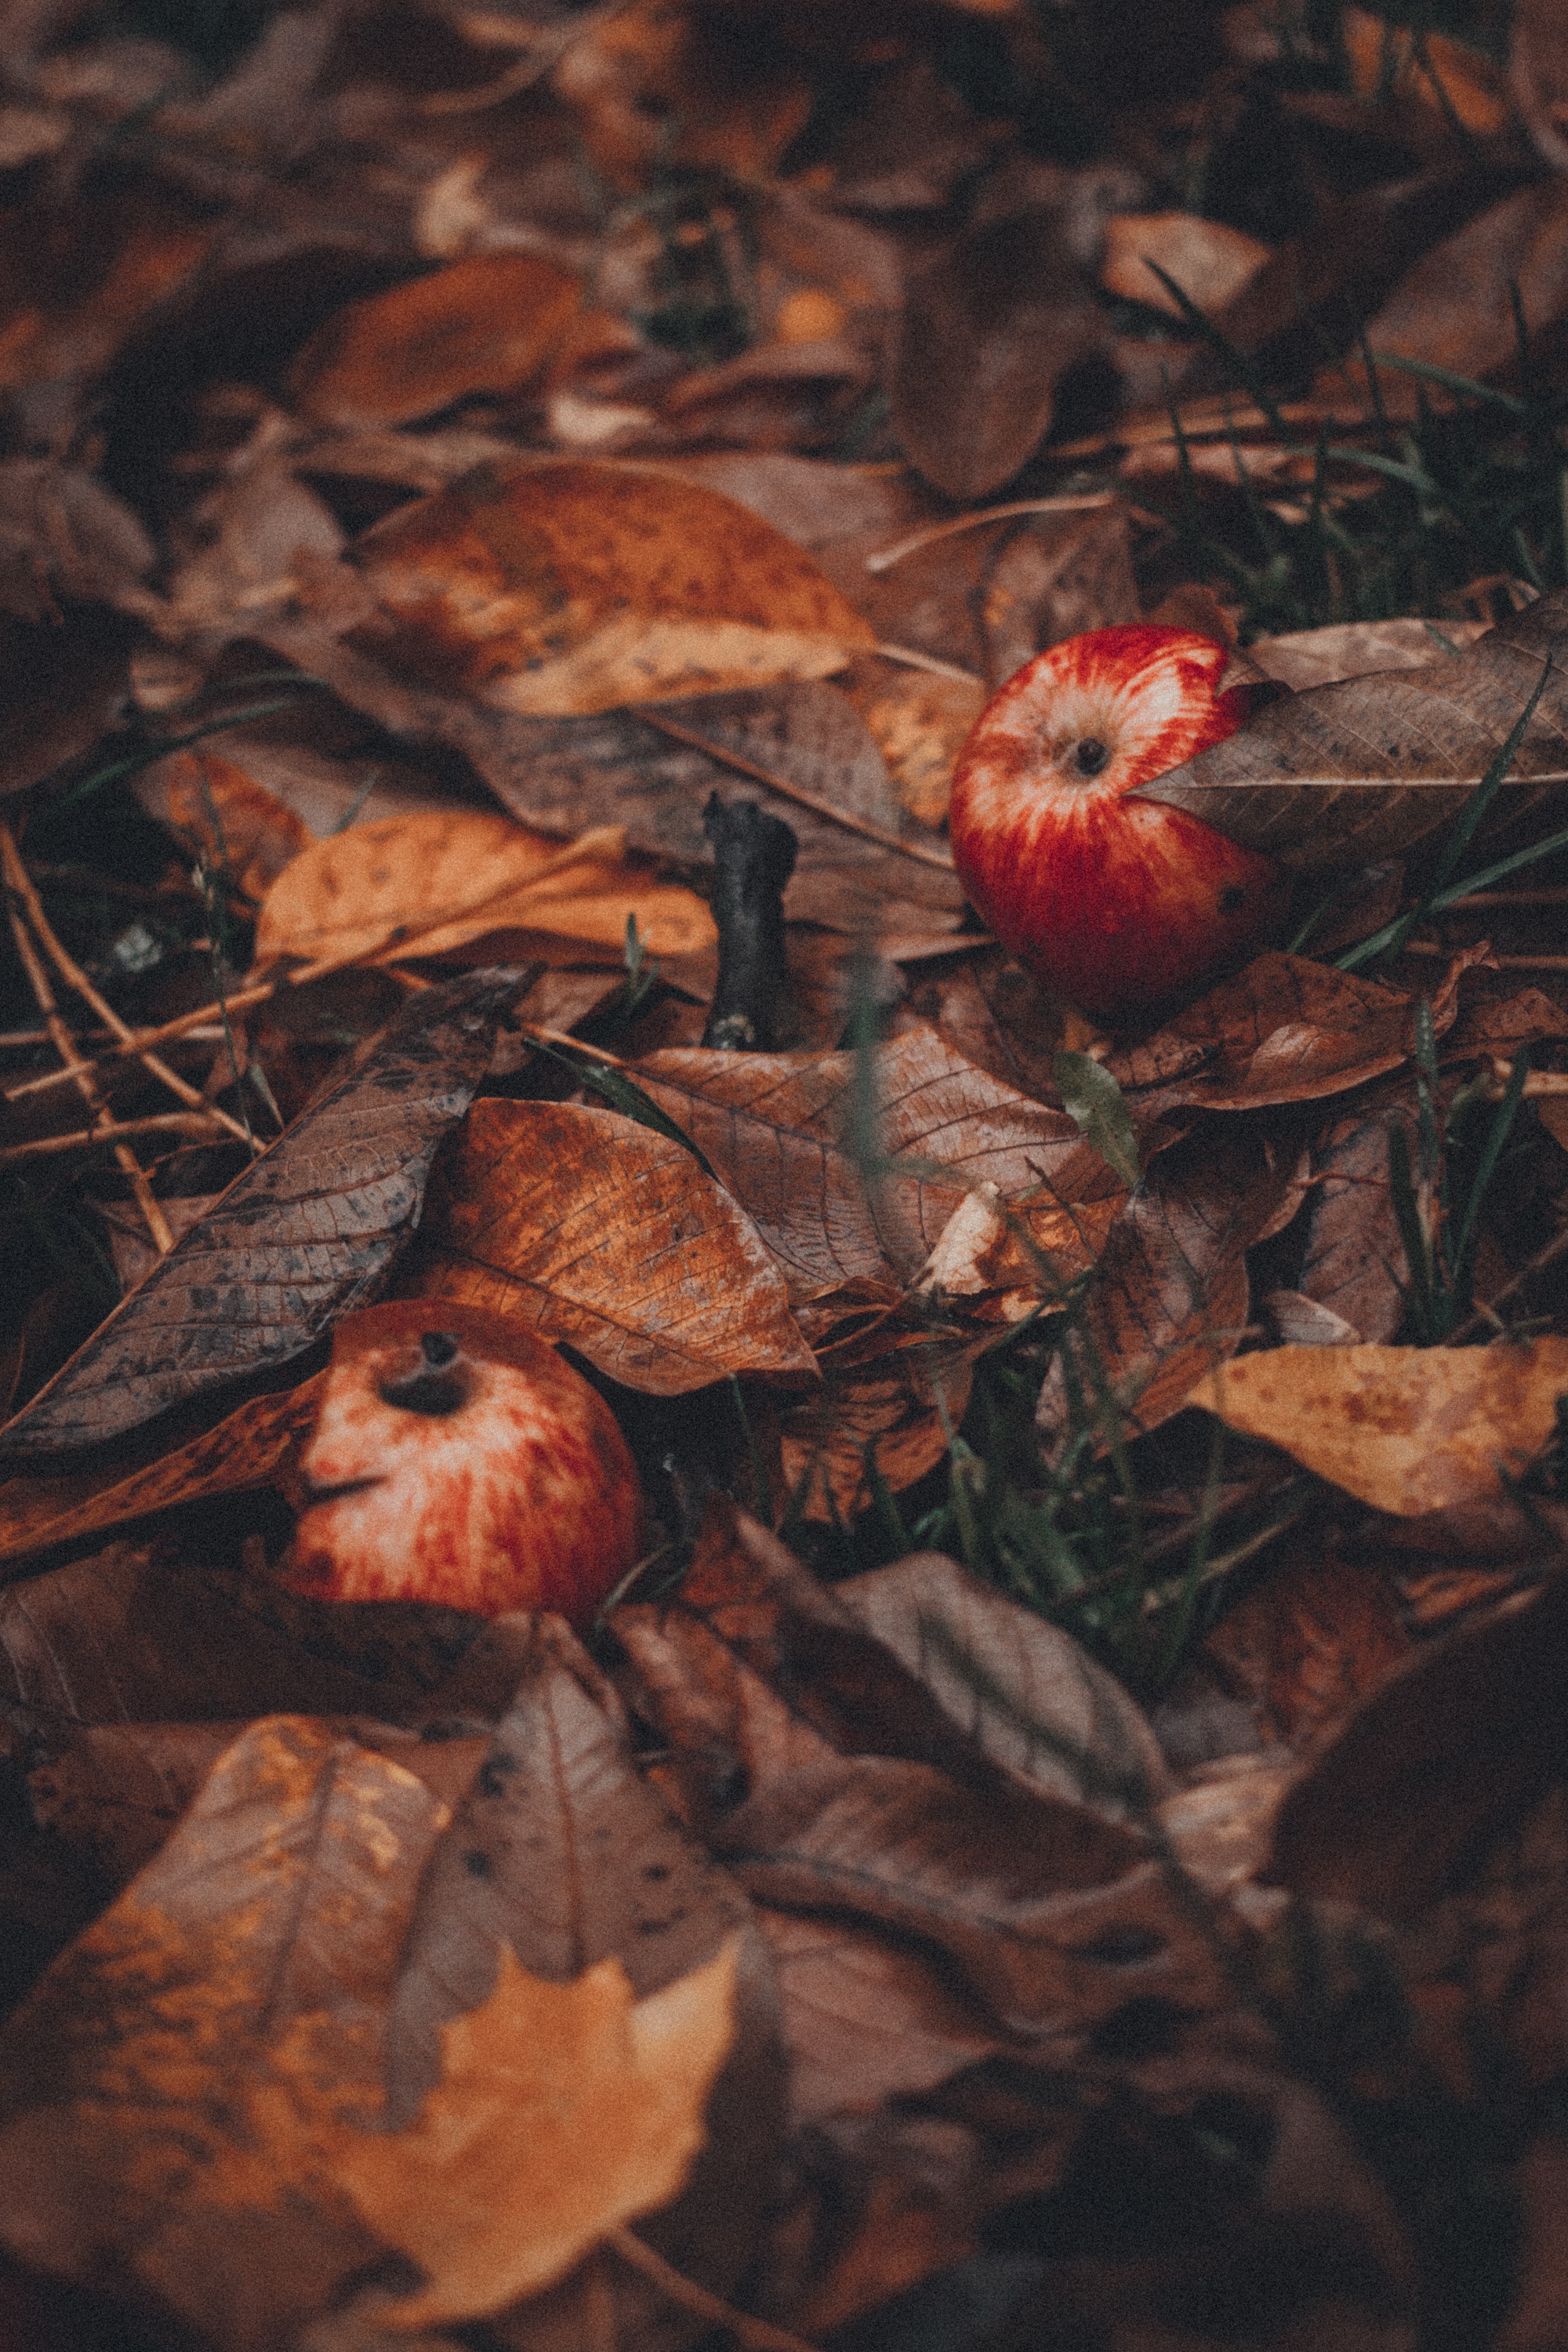 121083 download wallpaper food, grass, autumn, leaves, apples, harvest screensavers and pictures for free